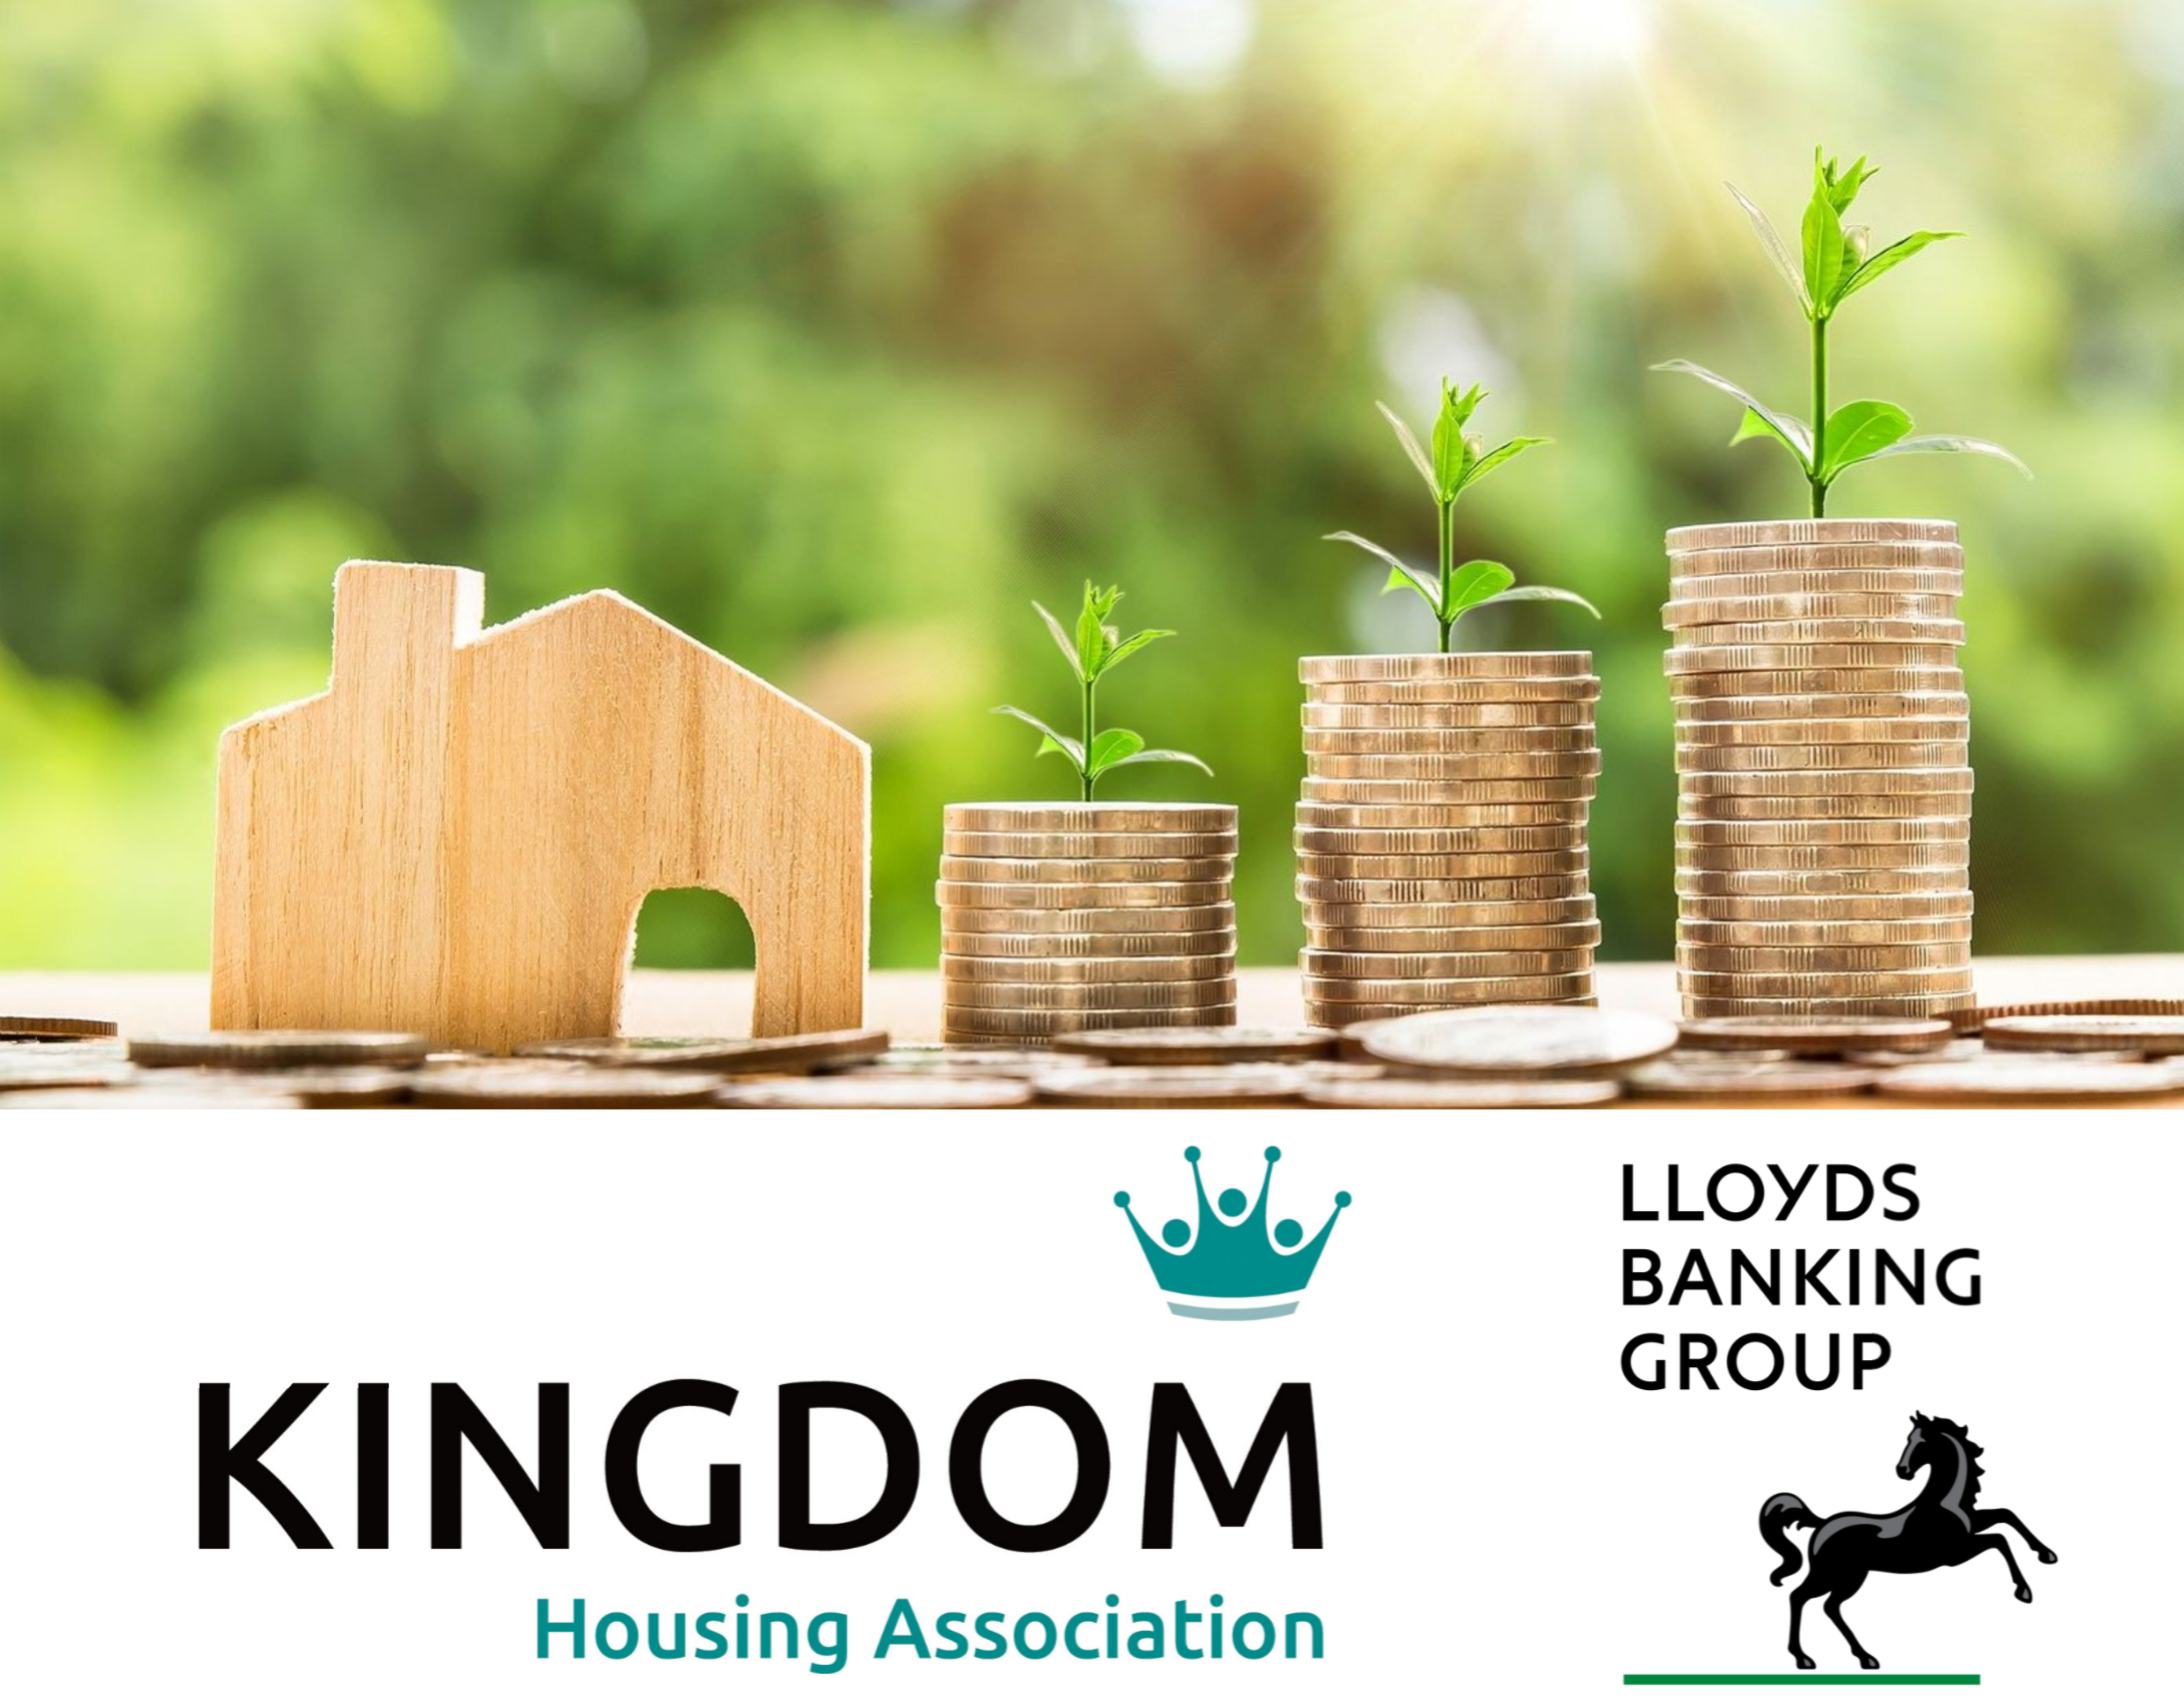 Kingdom Housing Association secures £10m credit facility from Lloyds